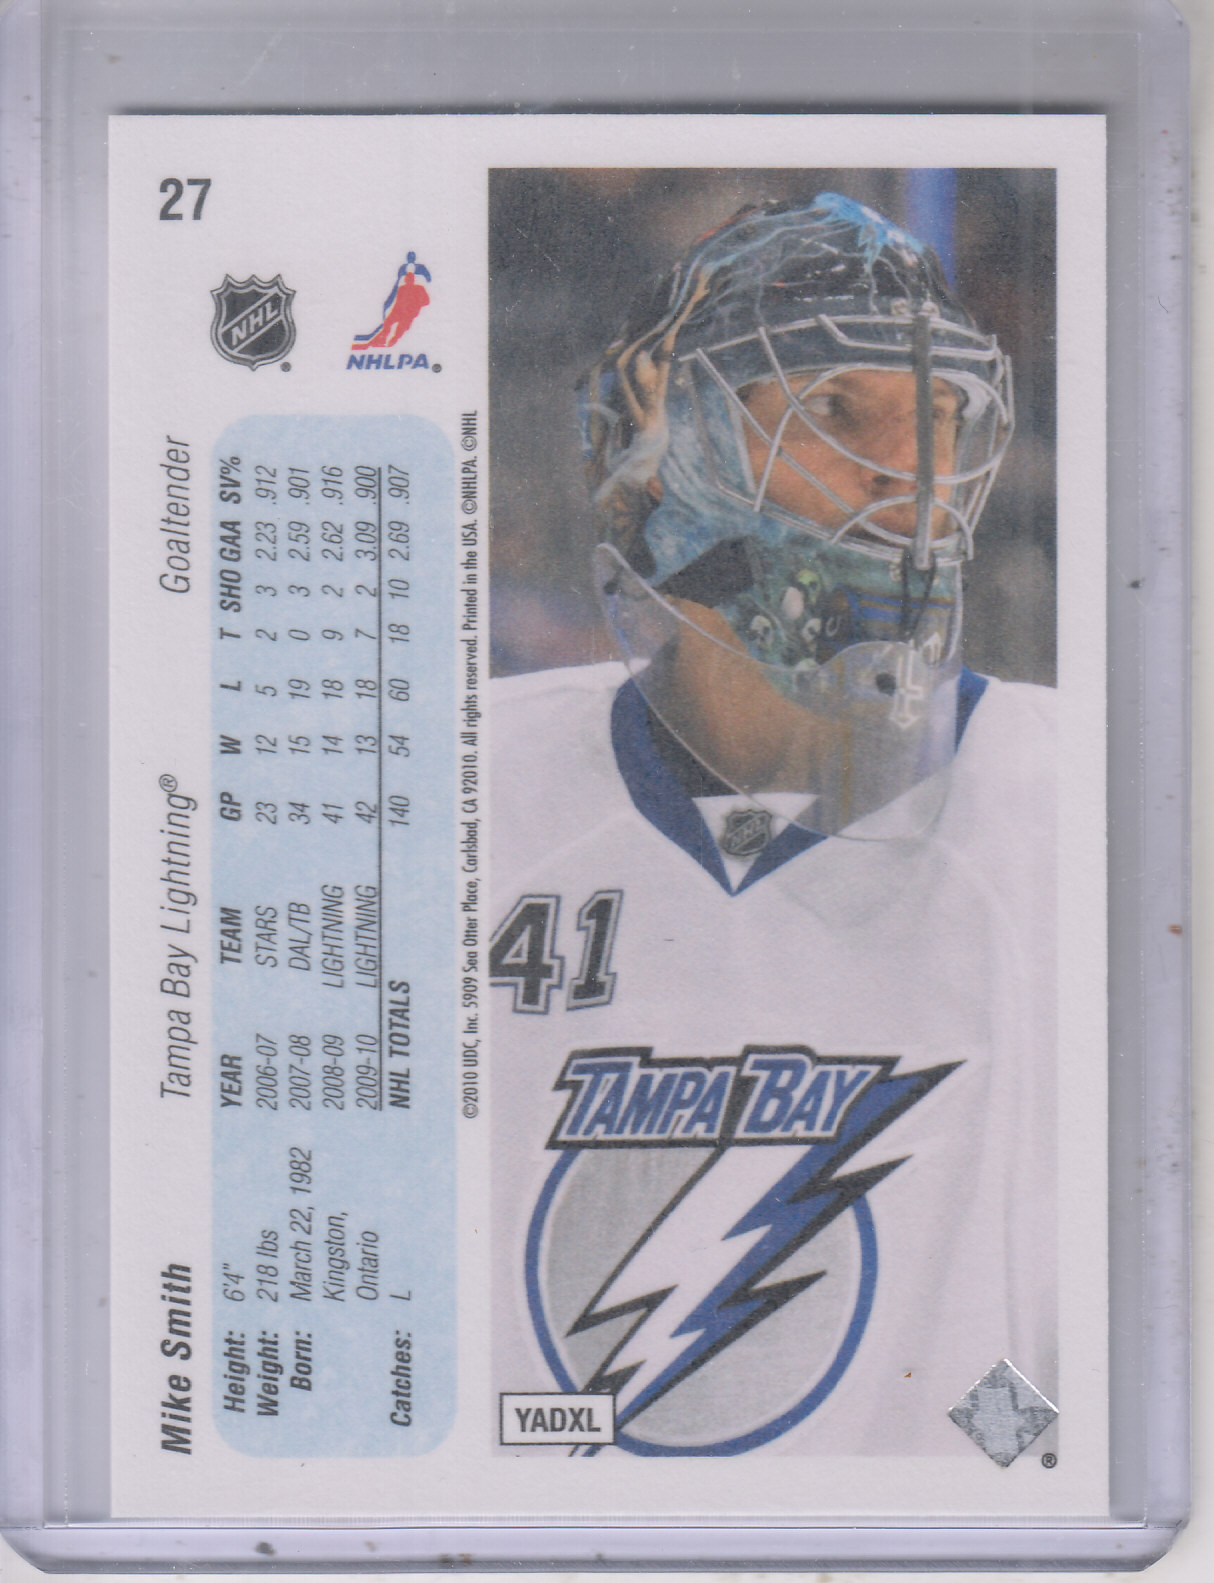 2010-11 Upper Deck 20th Anniversary Parallel #27 Mike Smith back image